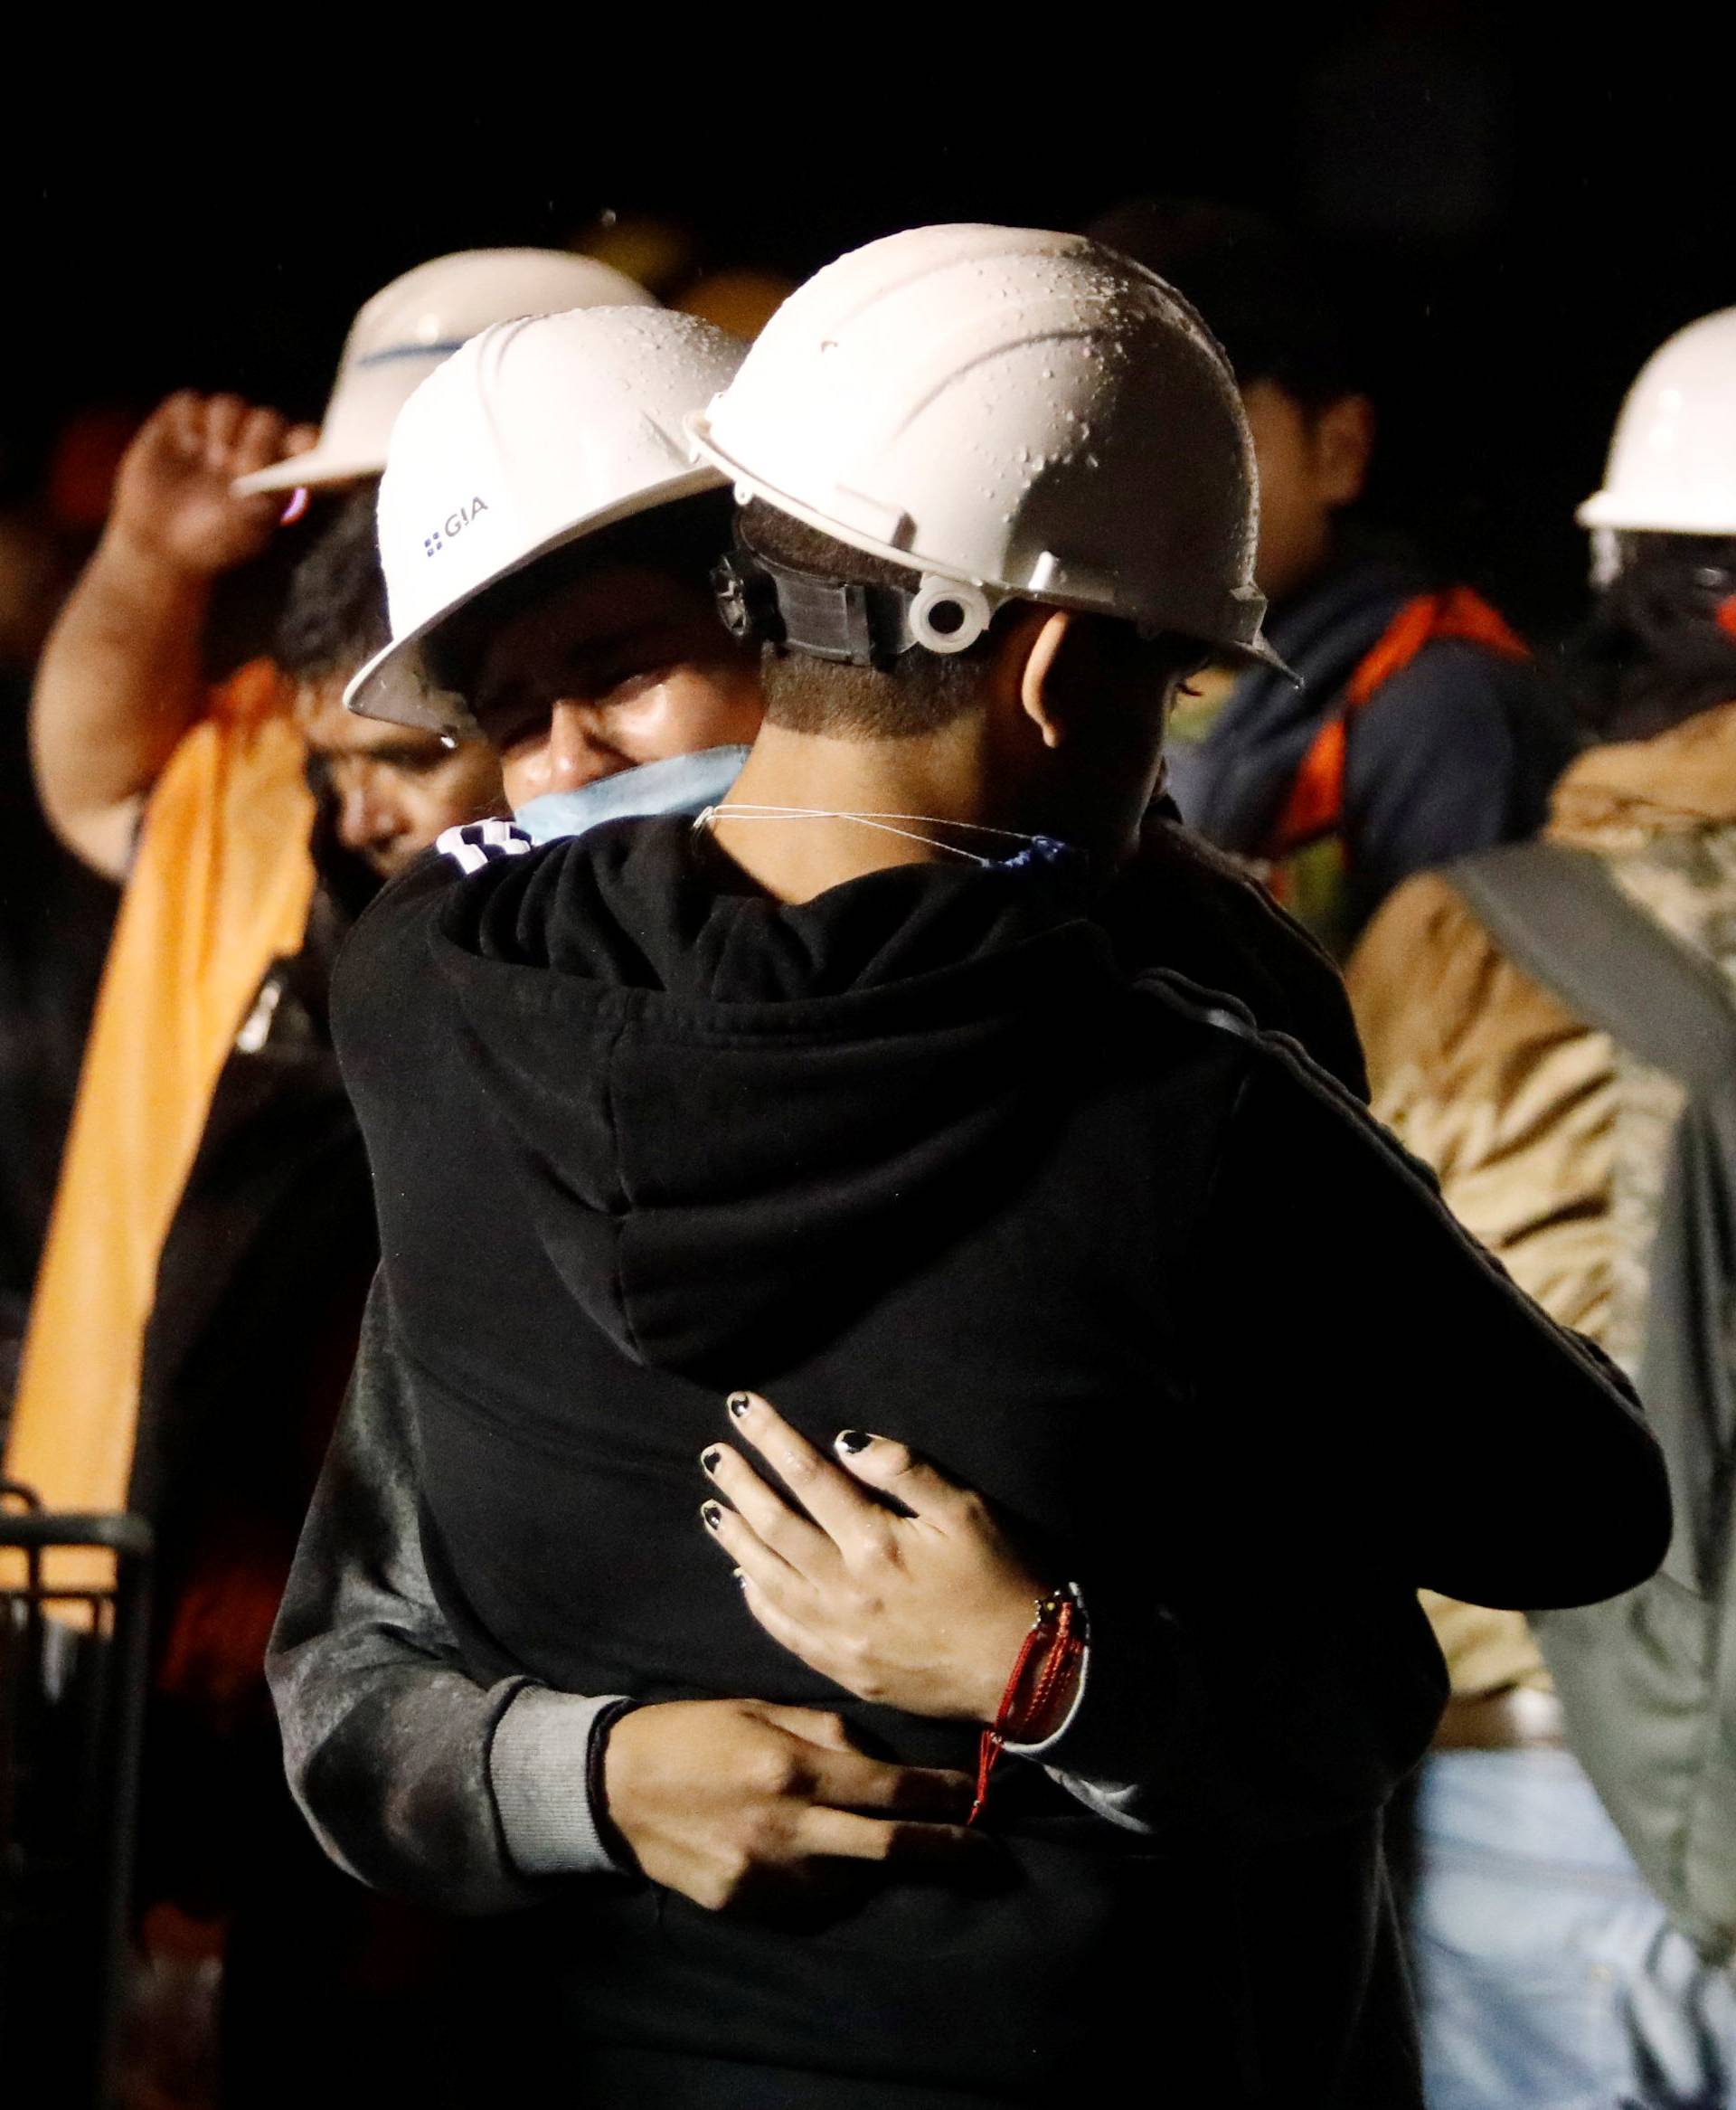 Workers hug during the search for students at Enrique Rebsamen school after an earthquake in Mexico City